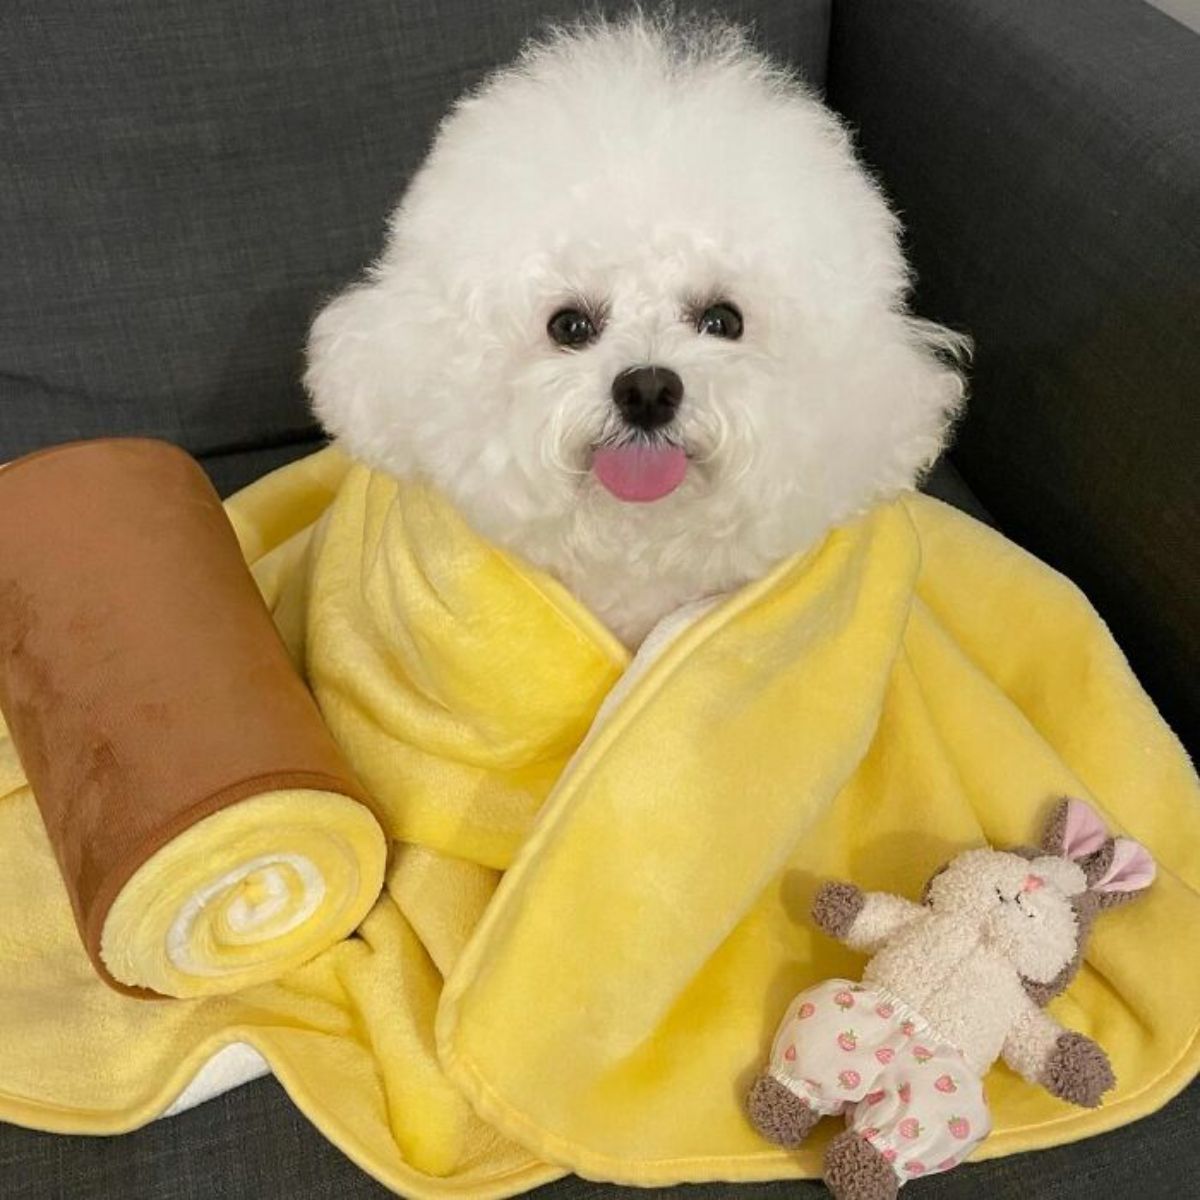 small fluffy white dog wrapped ina ywllo blanket with a brown swiss roll and a brown rabbit toys on either side